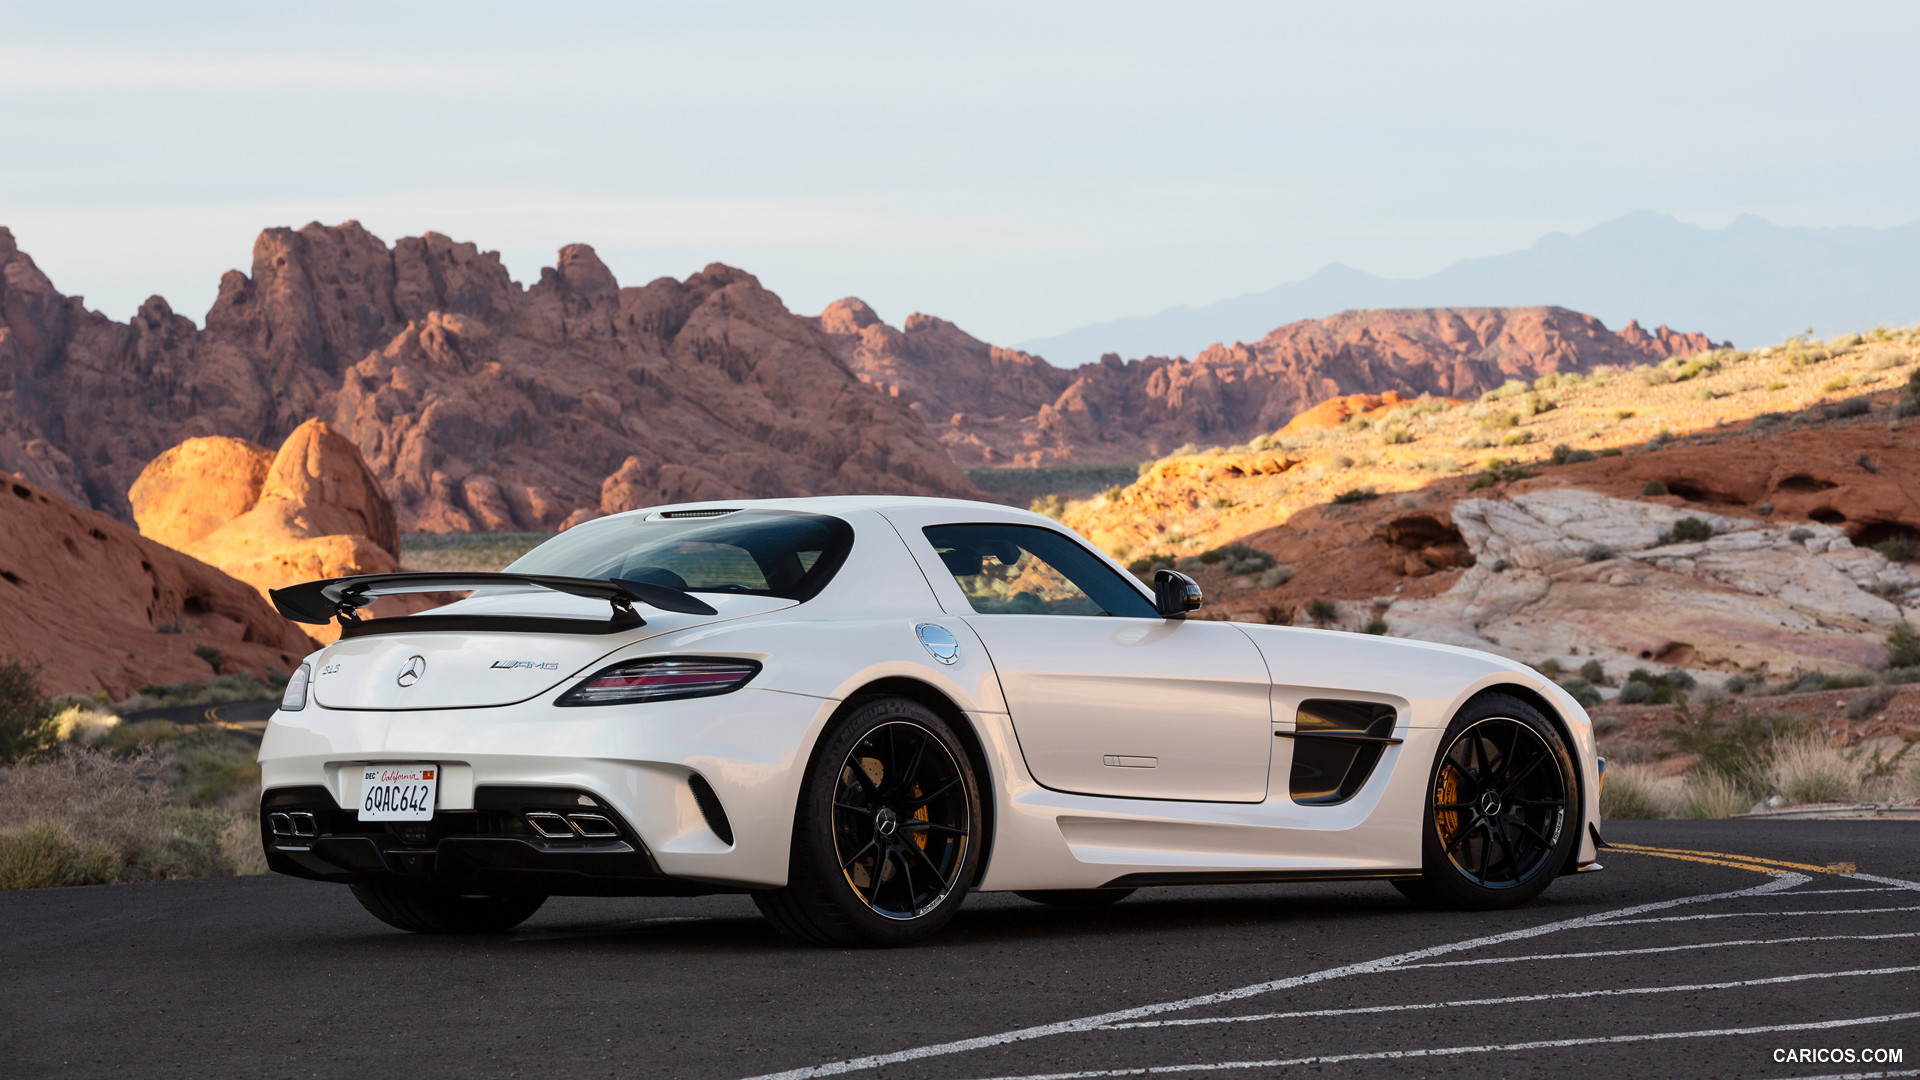 2014 Mercedes-Benz SLS AMG Coupe Black Series White - Rear, #10 of 40